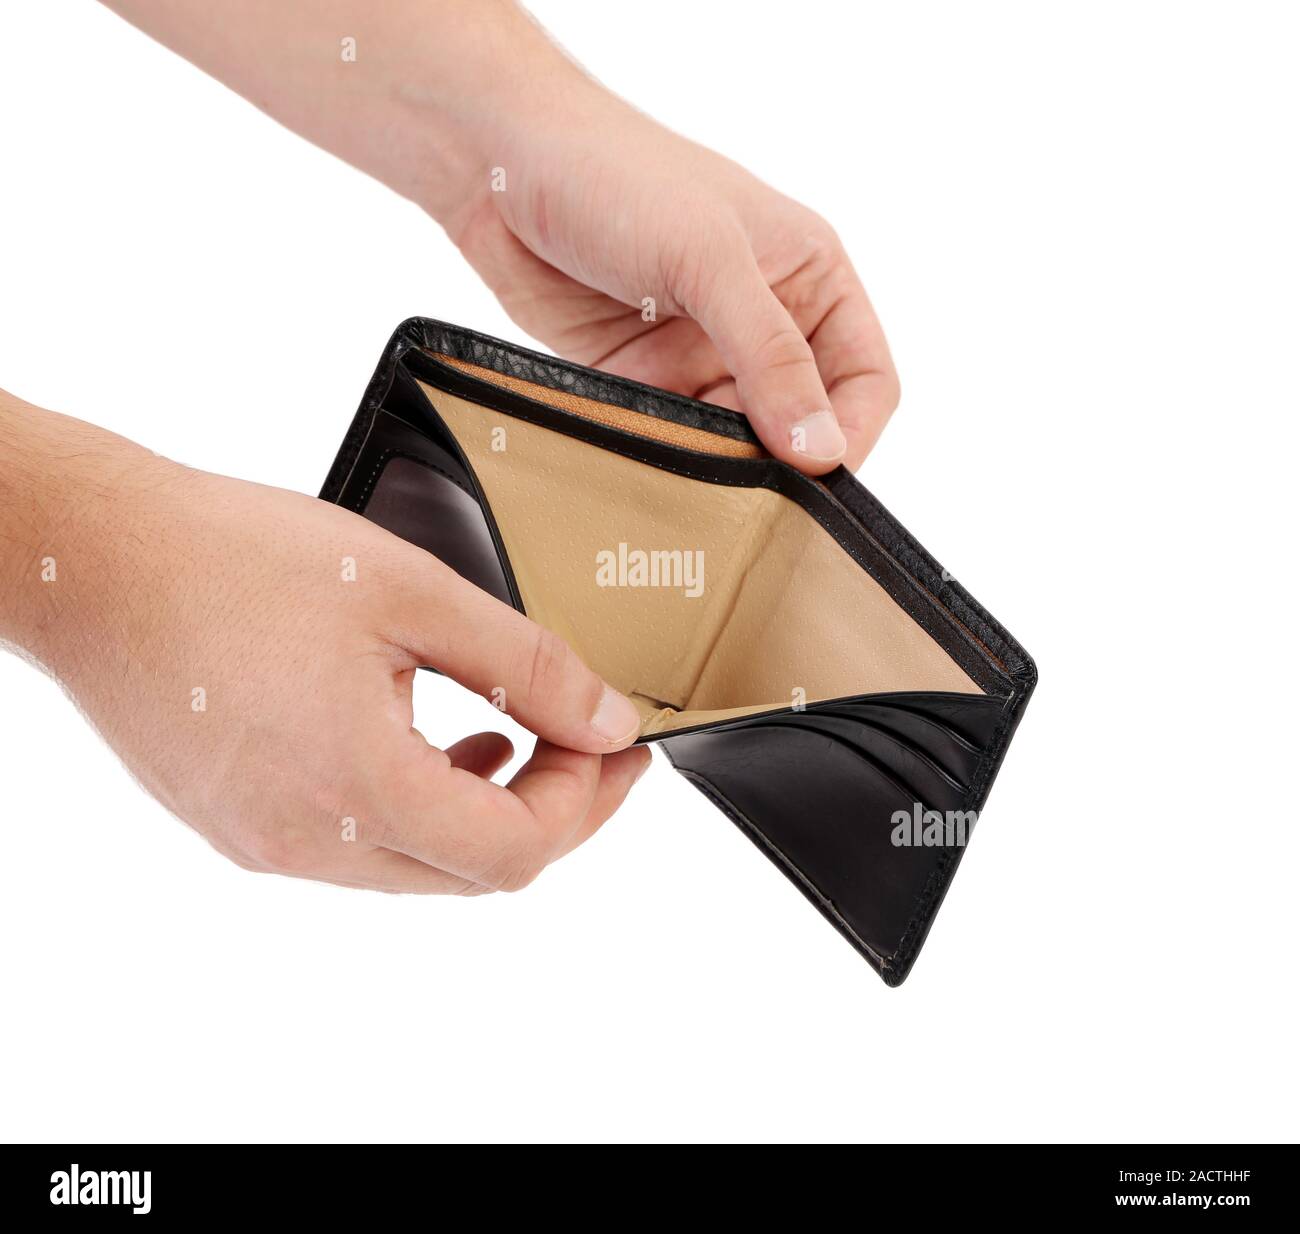 Empty Wallet Woman Stock Photos and Images - 123RF